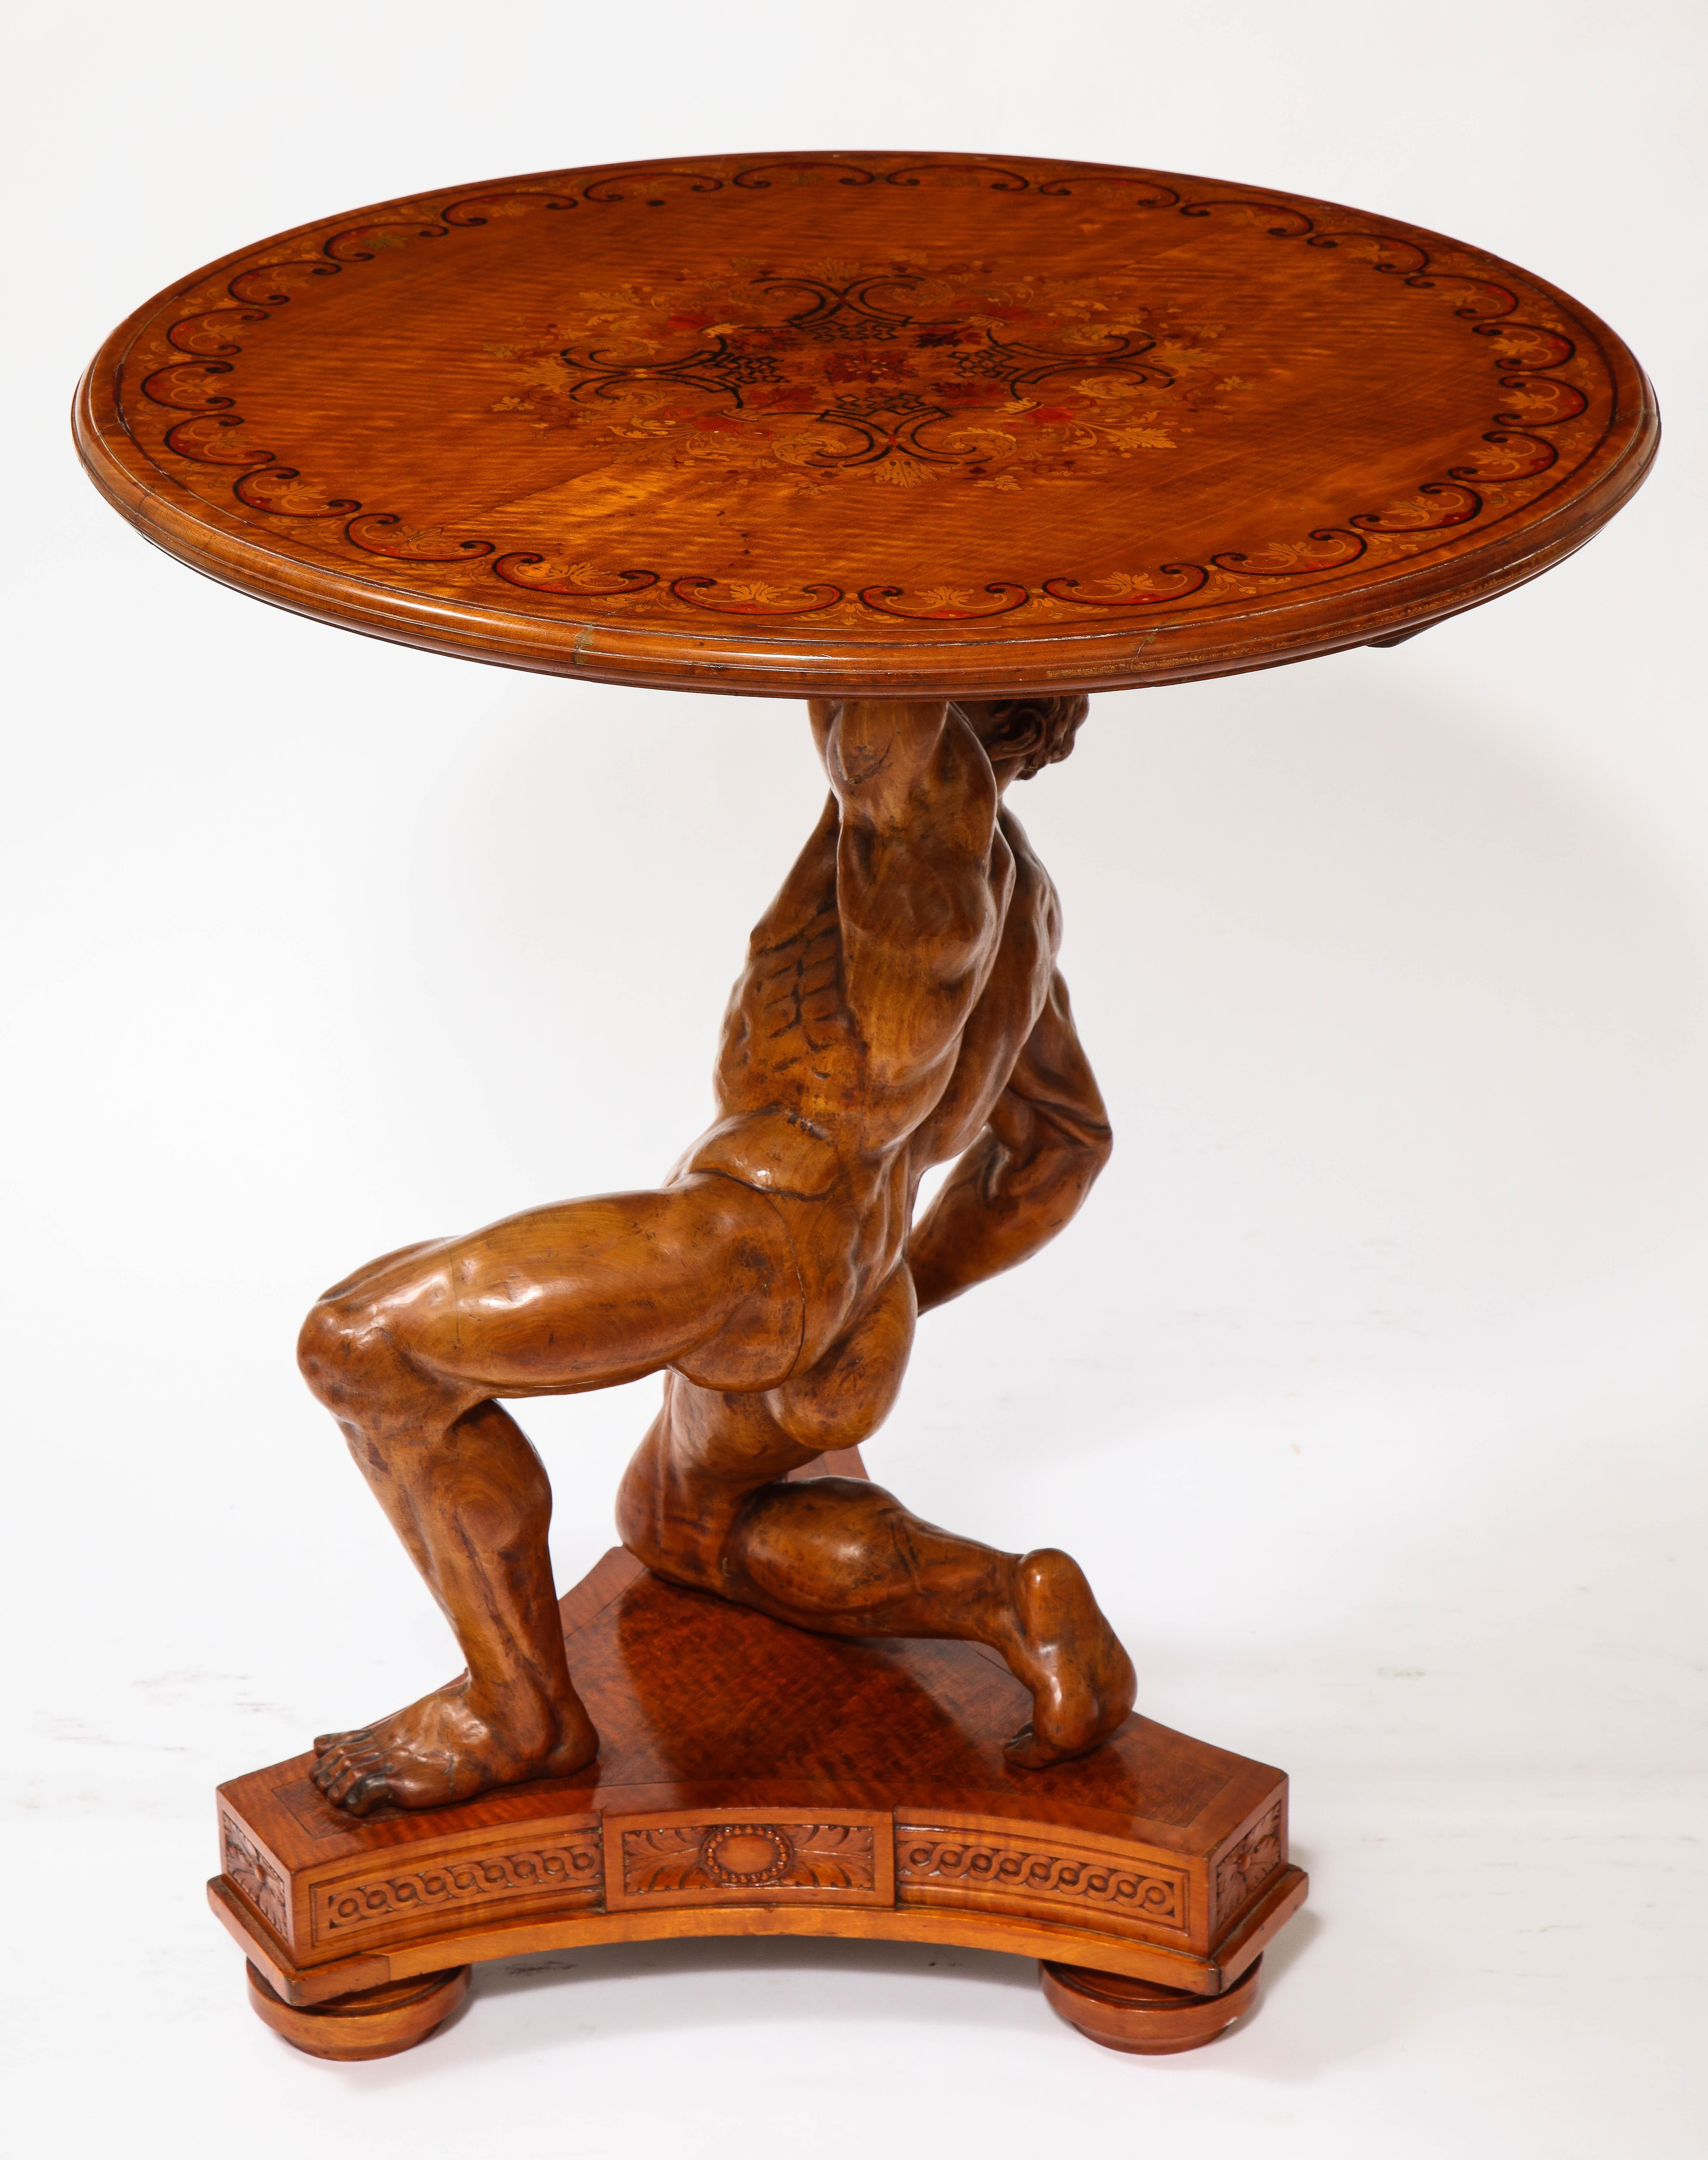 Late 19th Century 19th C. Carved Wood Marquetry Center Table of Atlas, Signed J. Plucknett & Co. For Sale